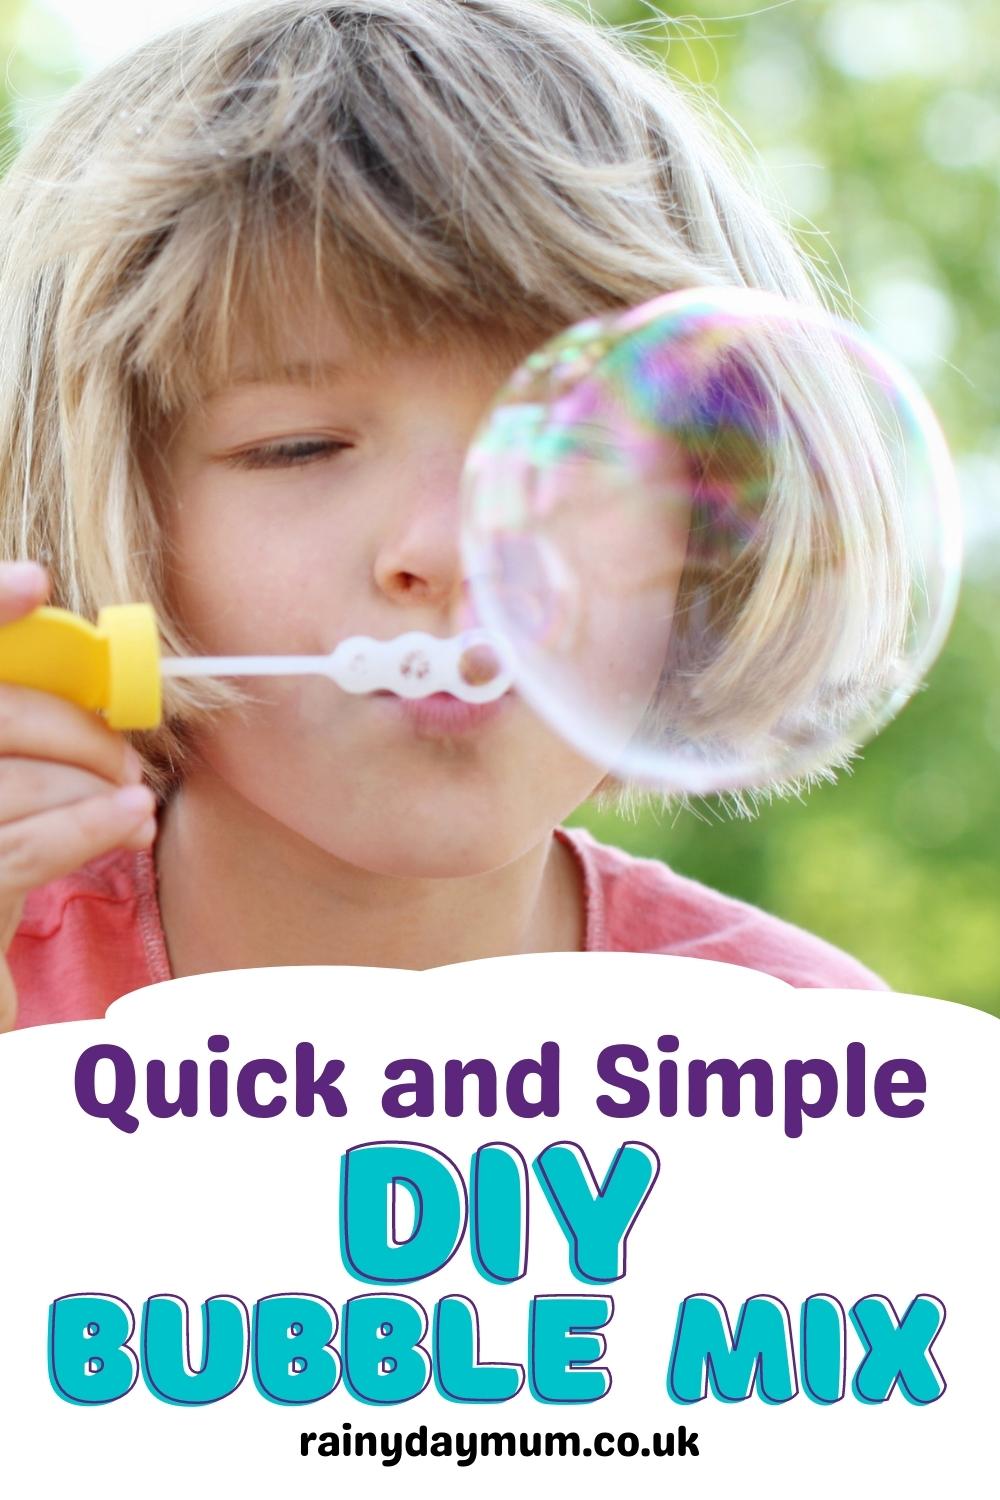 Pinterest image of a girl blowing bubbles with text at the bottom reading quick and simple DIY Bubble Mix rainydaymum.co.uk.